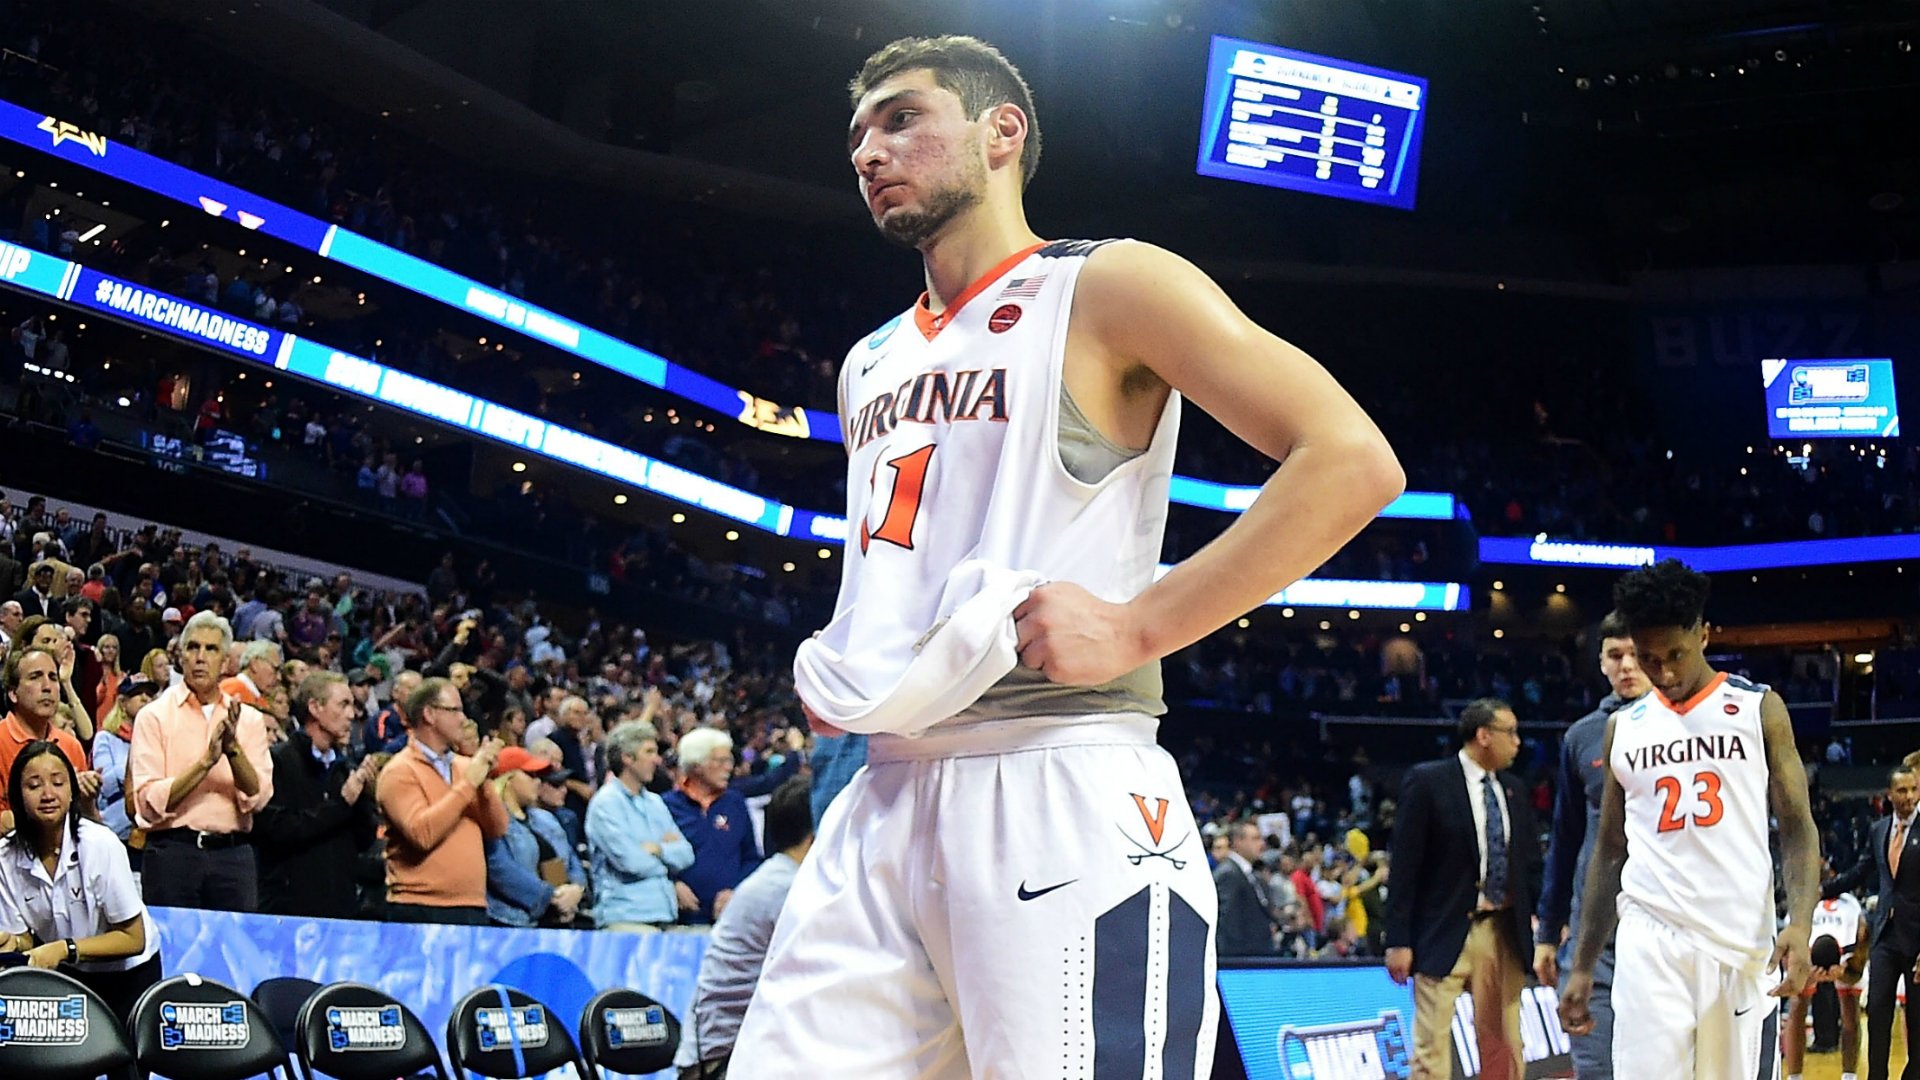 Virginia's Ty Jerome shakes head at reporter's question about UMBC